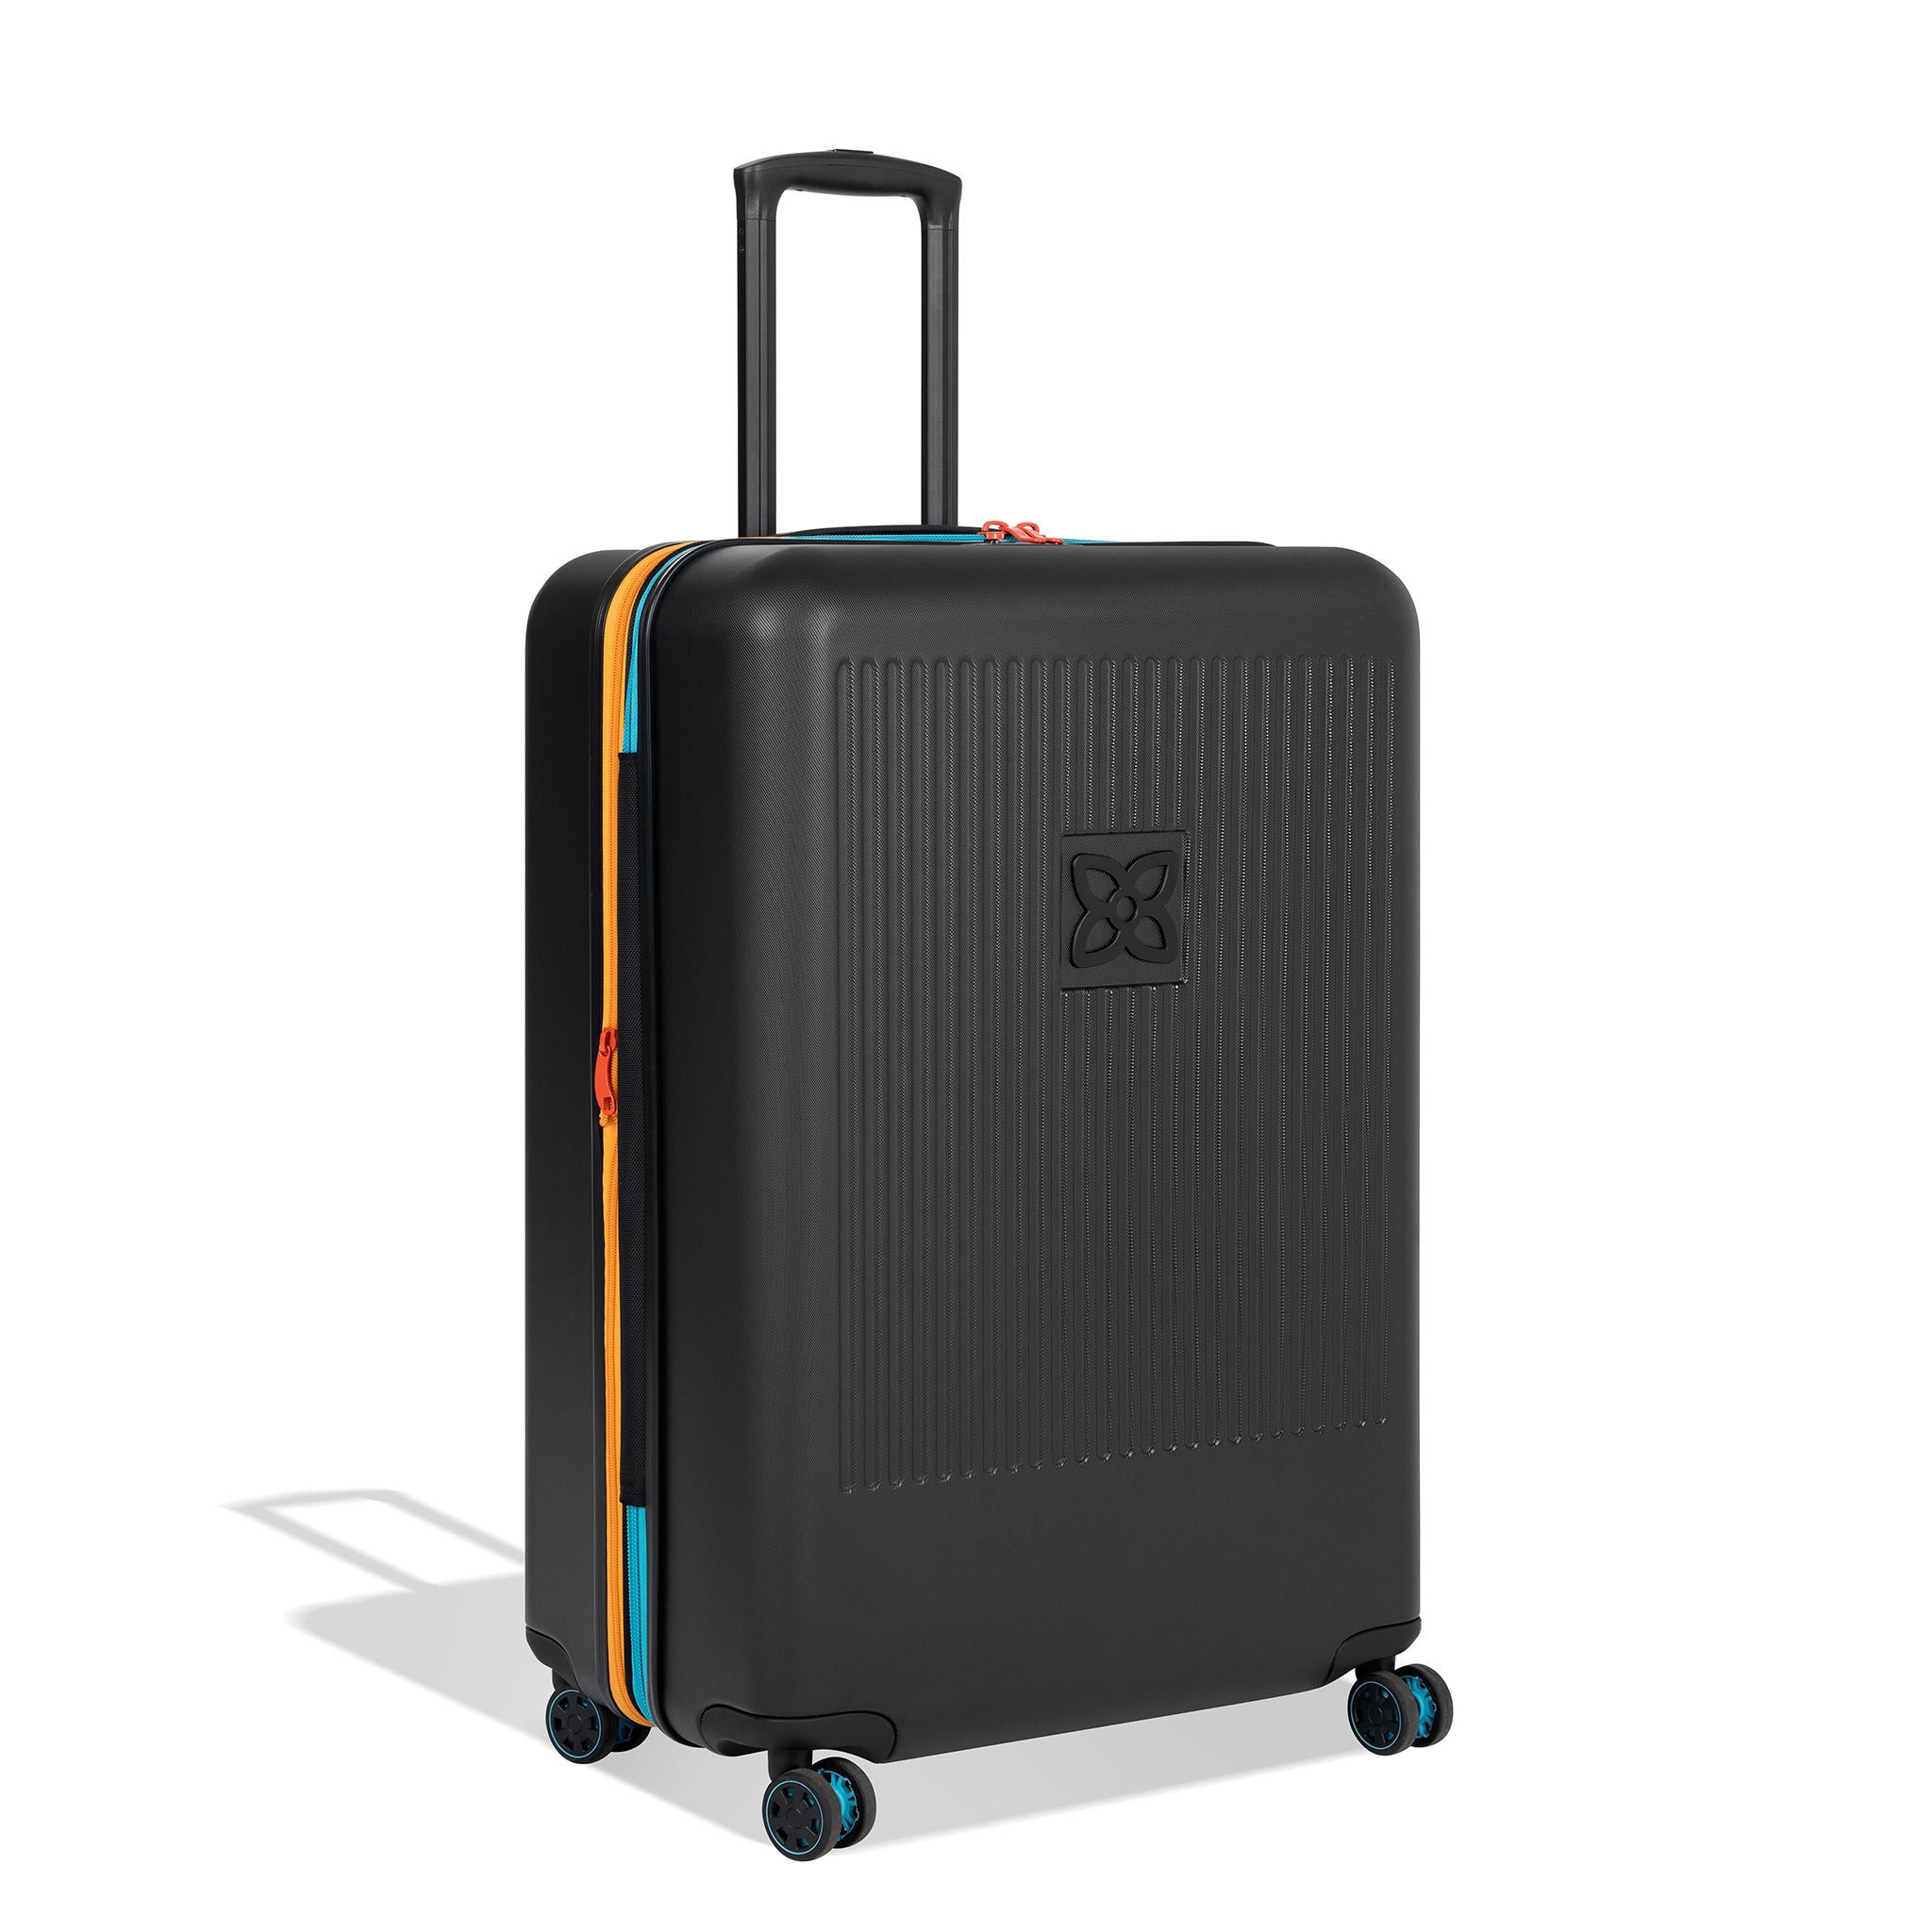 Angled front view of Sherpani hard-shell checked luggage, the Meridian in Chromatic. Meridian features include a retractable luggage handle, uncrushable exterior, TSA-approved locking zippers and four 36-degree spinner wheels. Chromatic color is primarily black with pops of color in red, yellow and blue. #color_chromatic